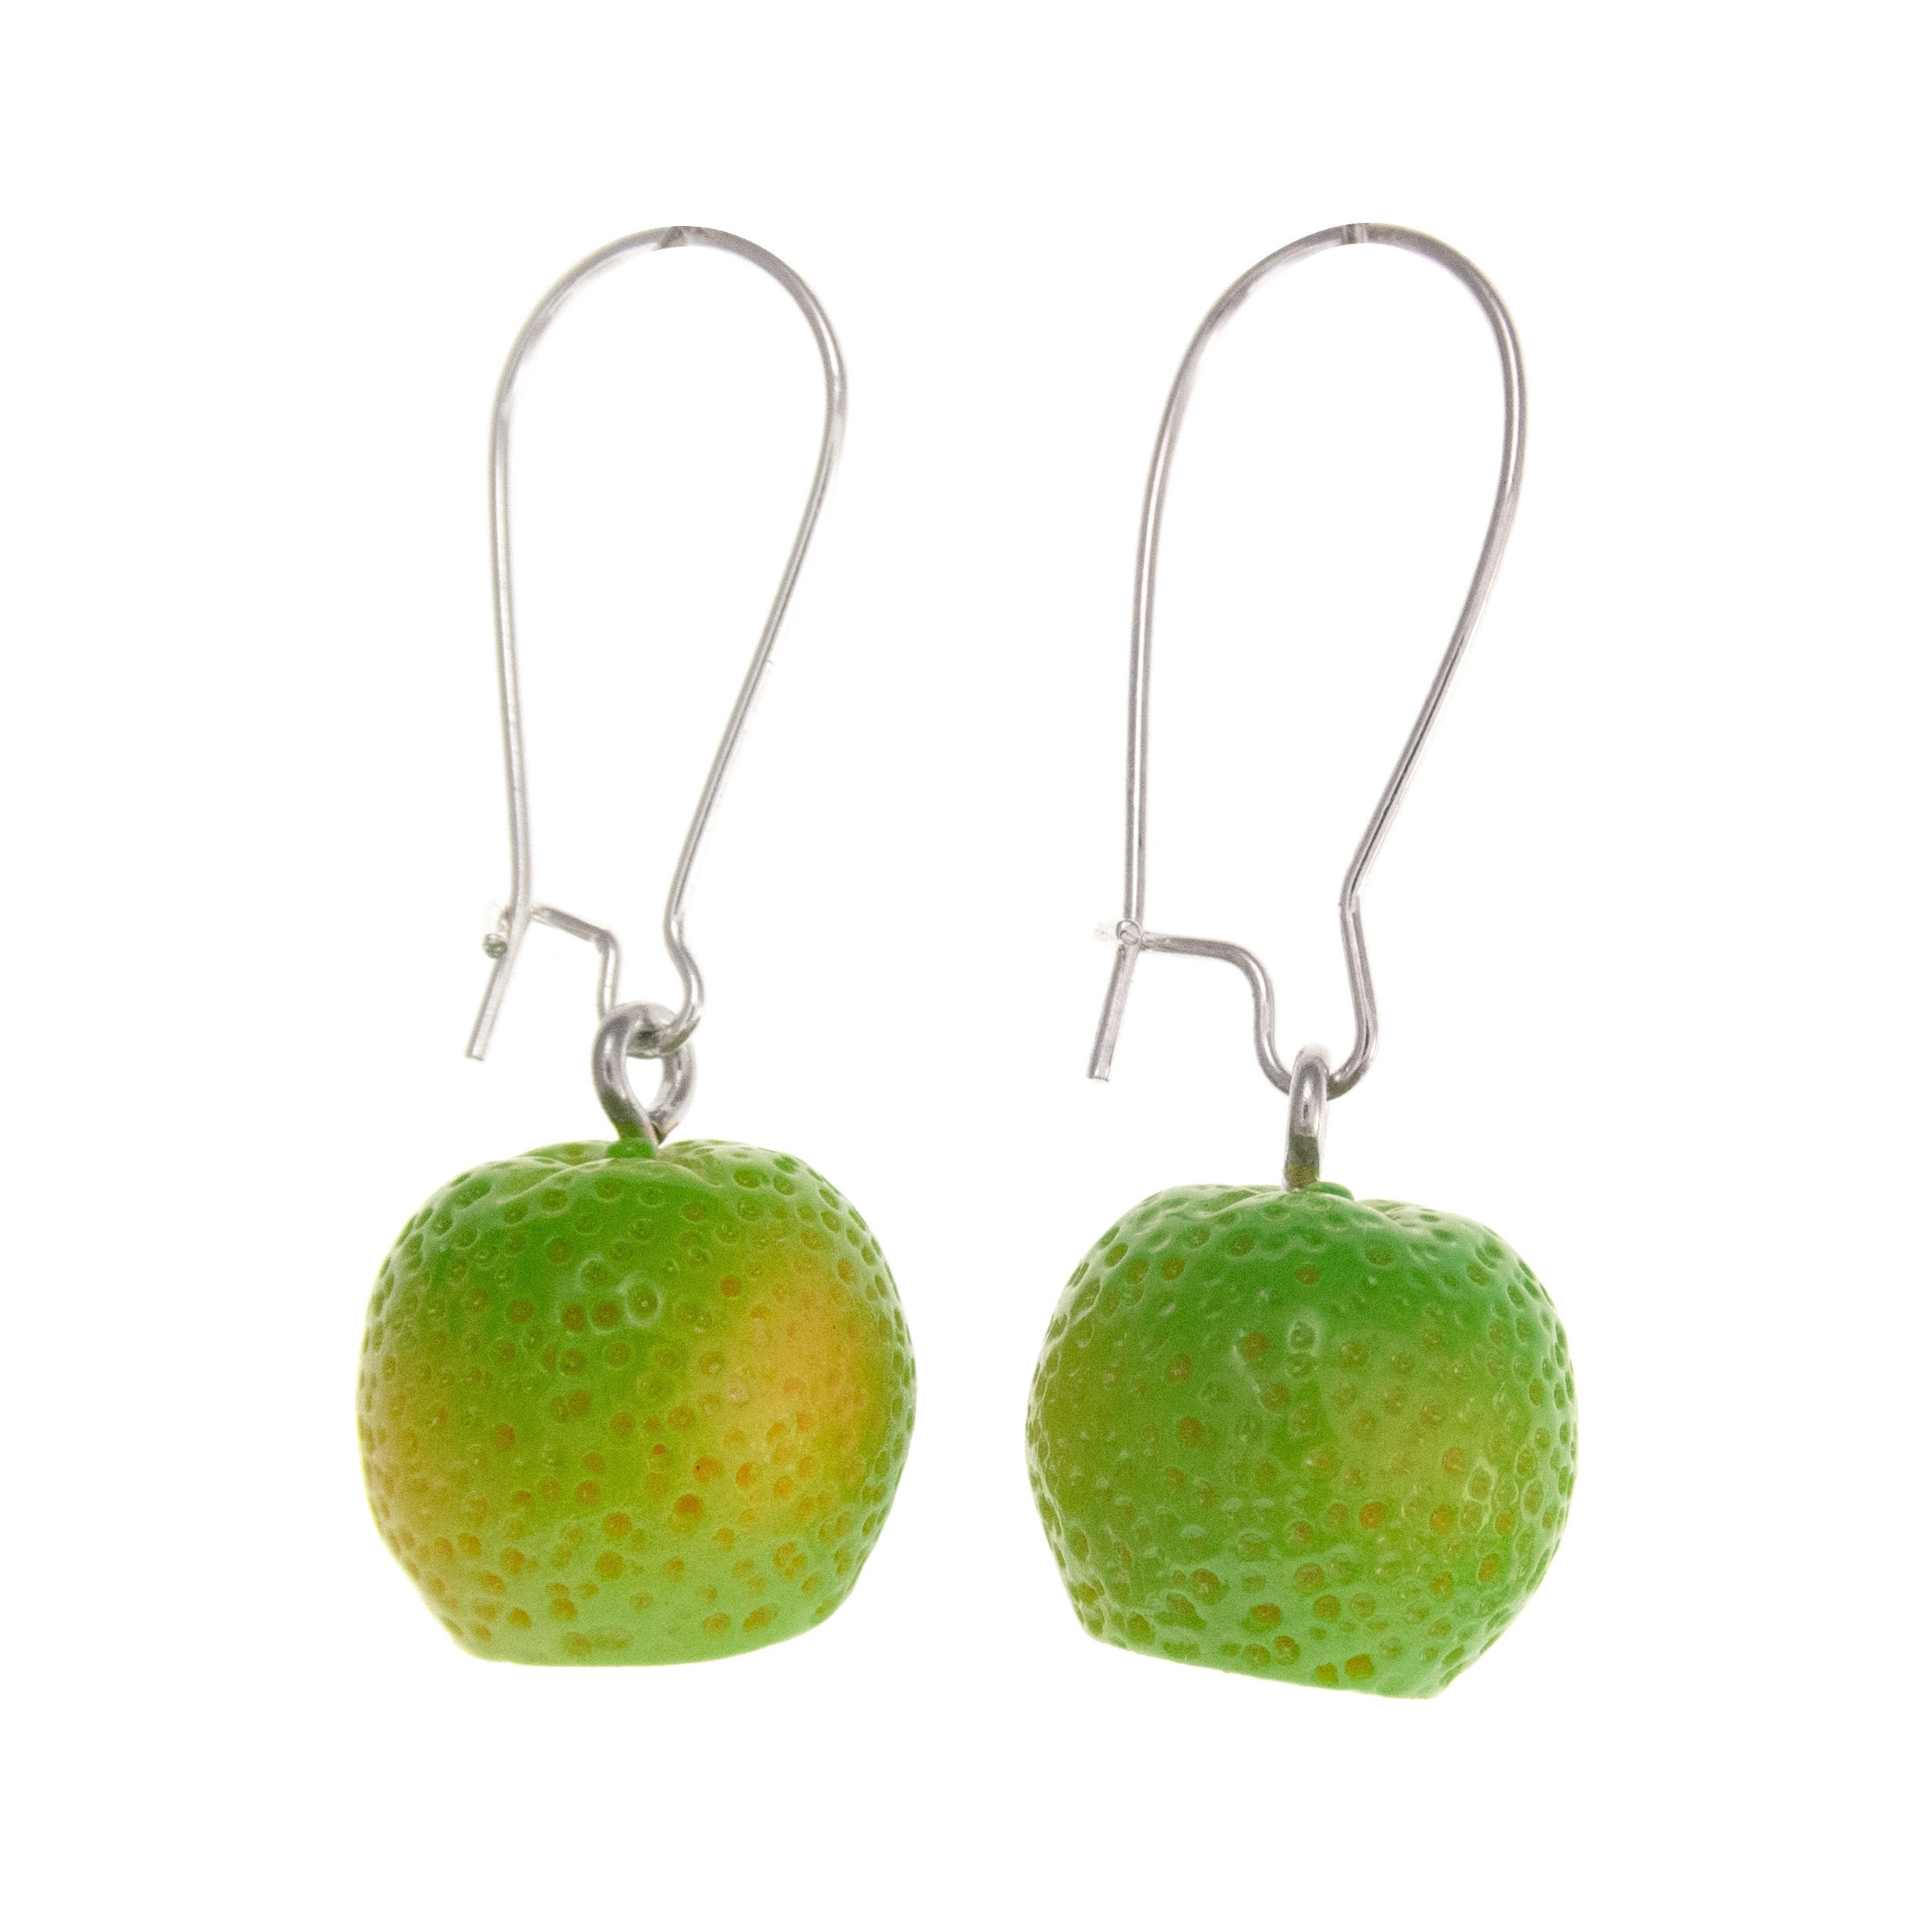 Lime Fruit Necklace for Woman, Mom. Orange Fruit Green